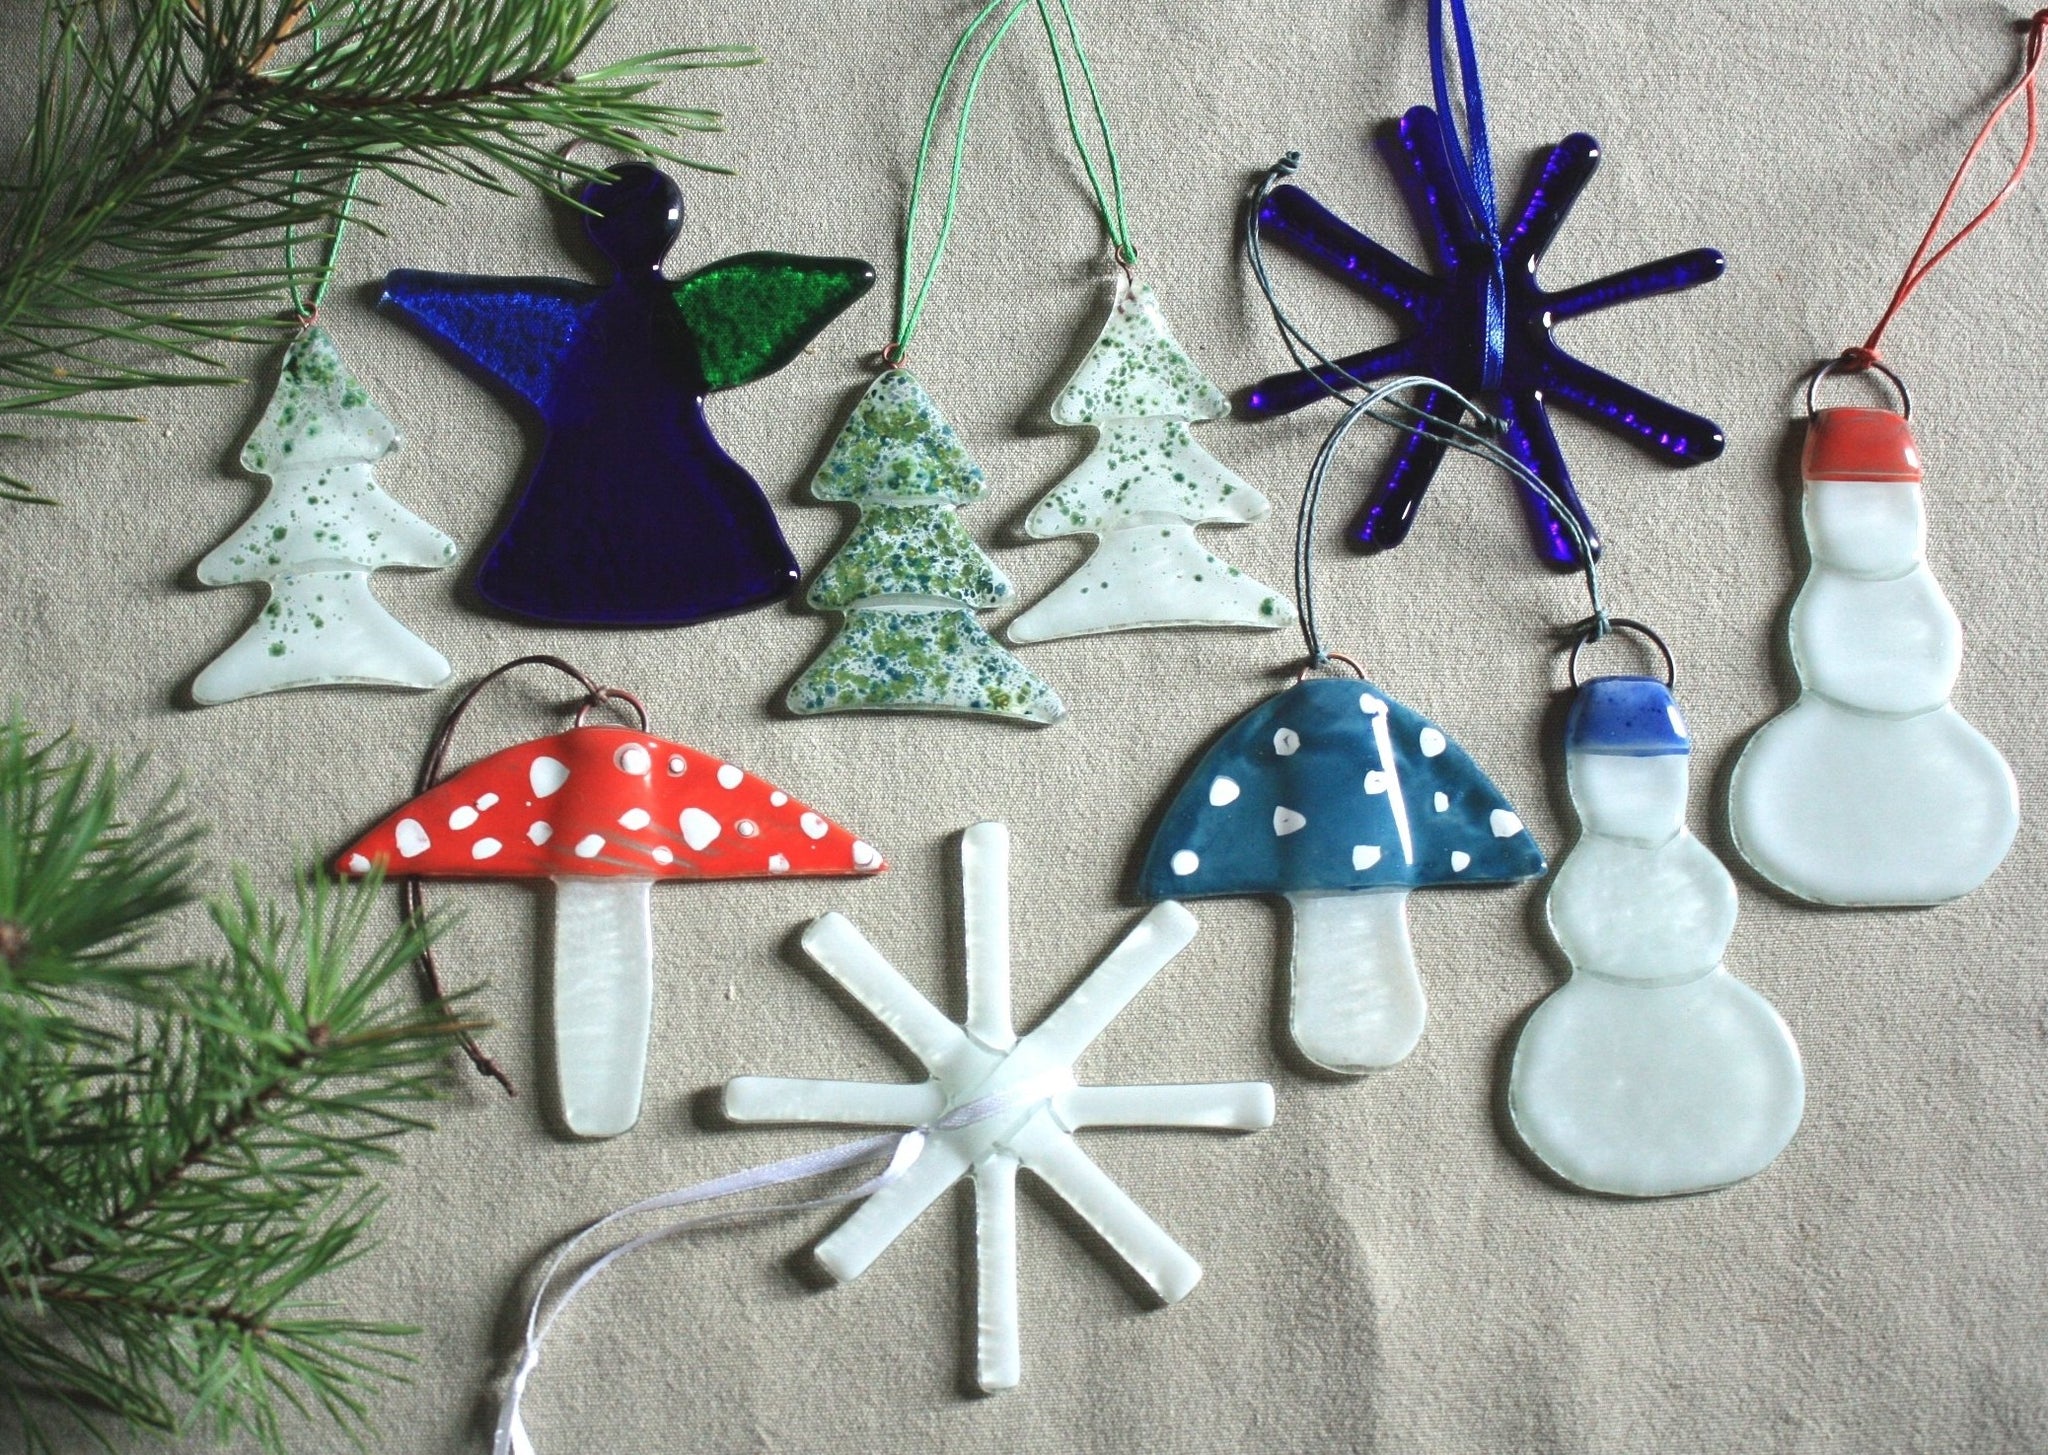 Set of 10 Ornaments in Merry Colours